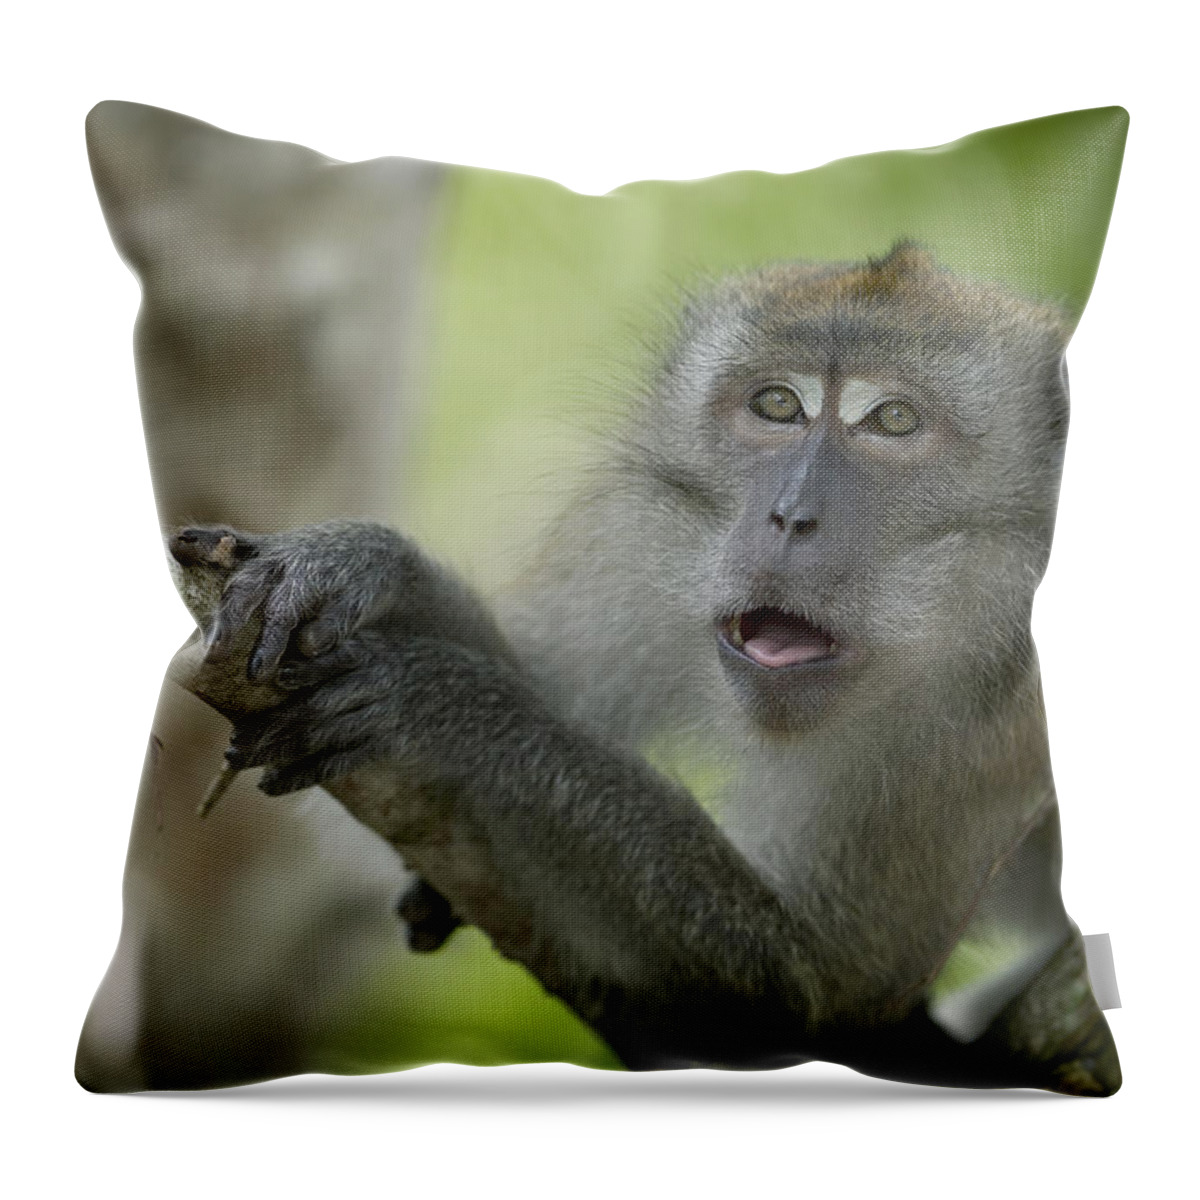 Mp Throw Pillow featuring the photograph Long-tailed Macaque Macaca Fascicularis by Cyril Ruoso